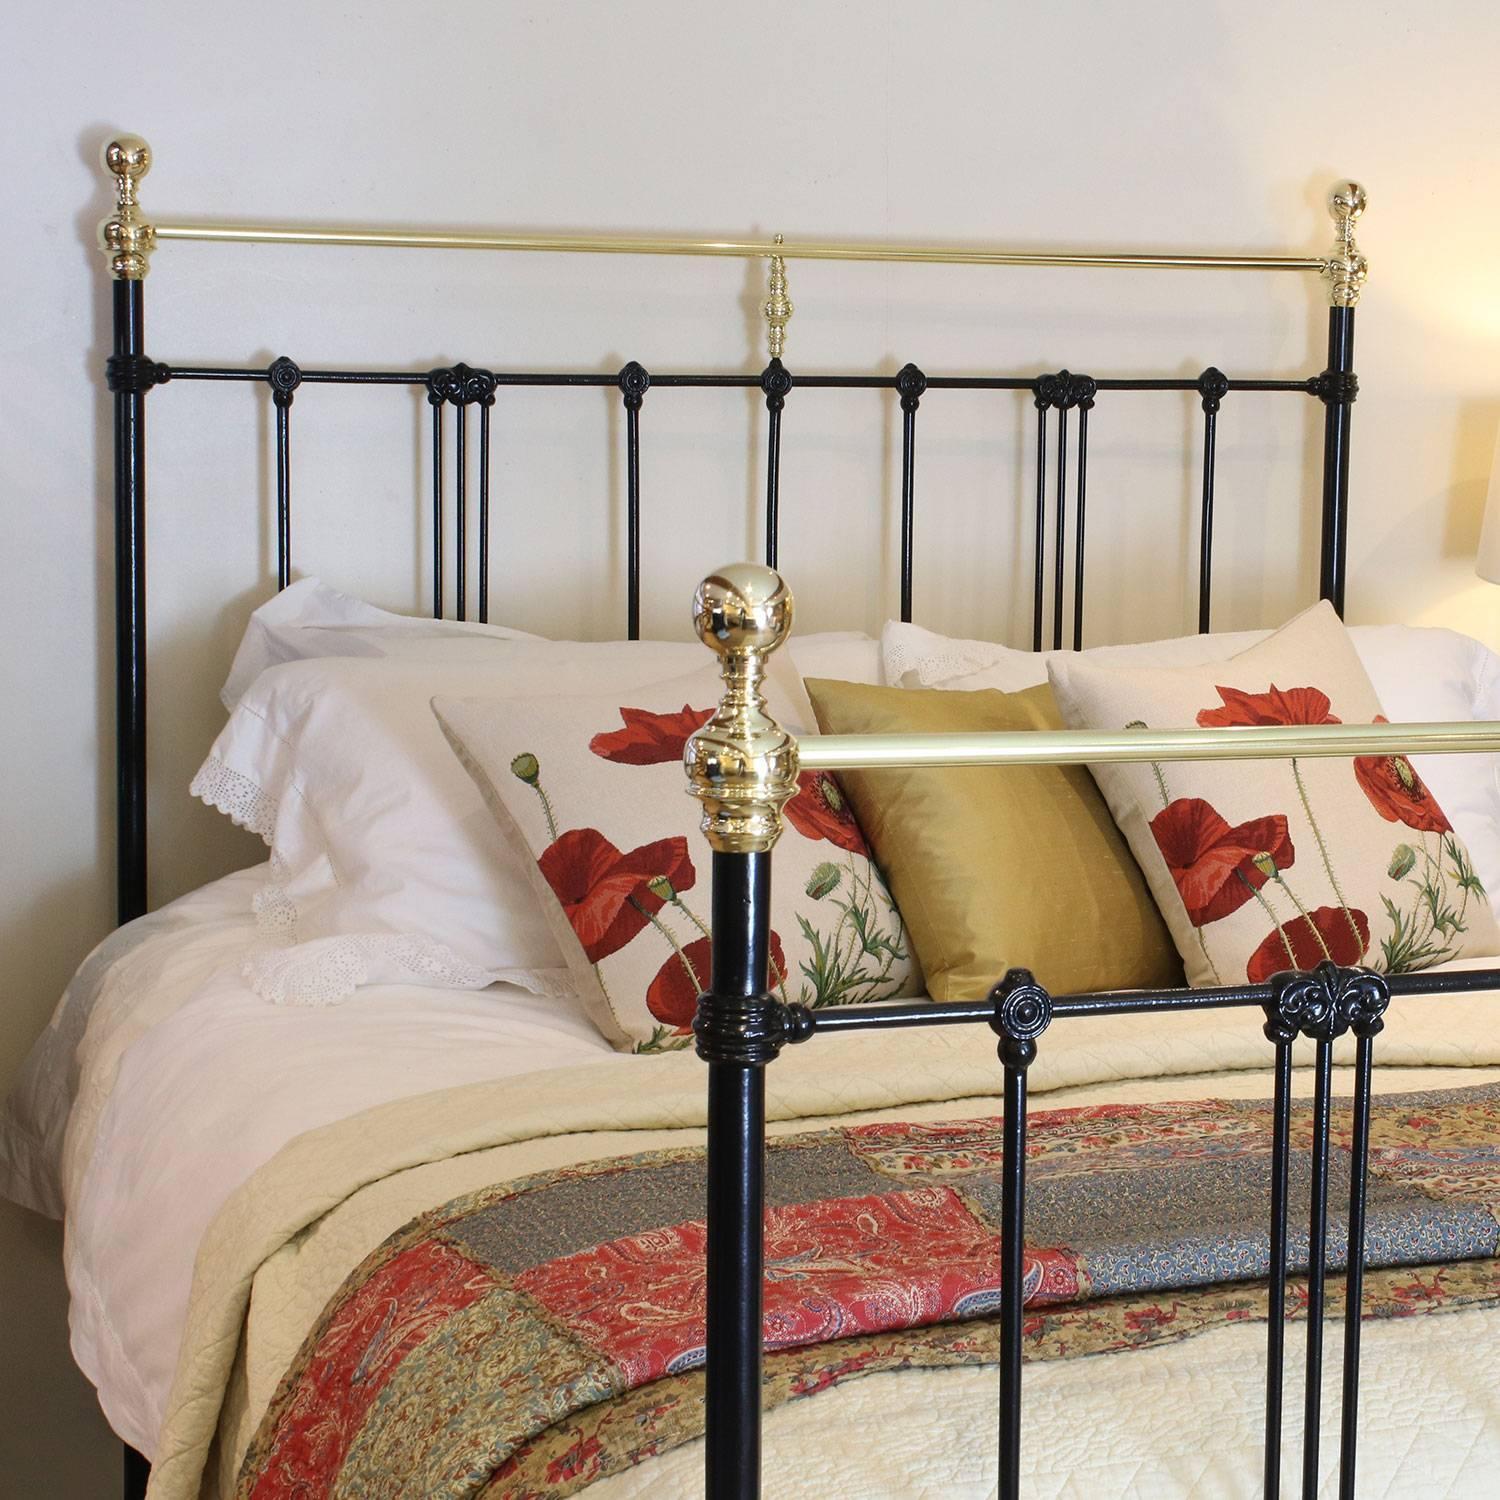 A brass and iron bedstead adapted from an original Victorian frame and finished in black with brass straight top rails and art nouveau style castings.

This bed accepts a British king-size or US queen-size (5ft, 60 inches or 150cm wide) base and